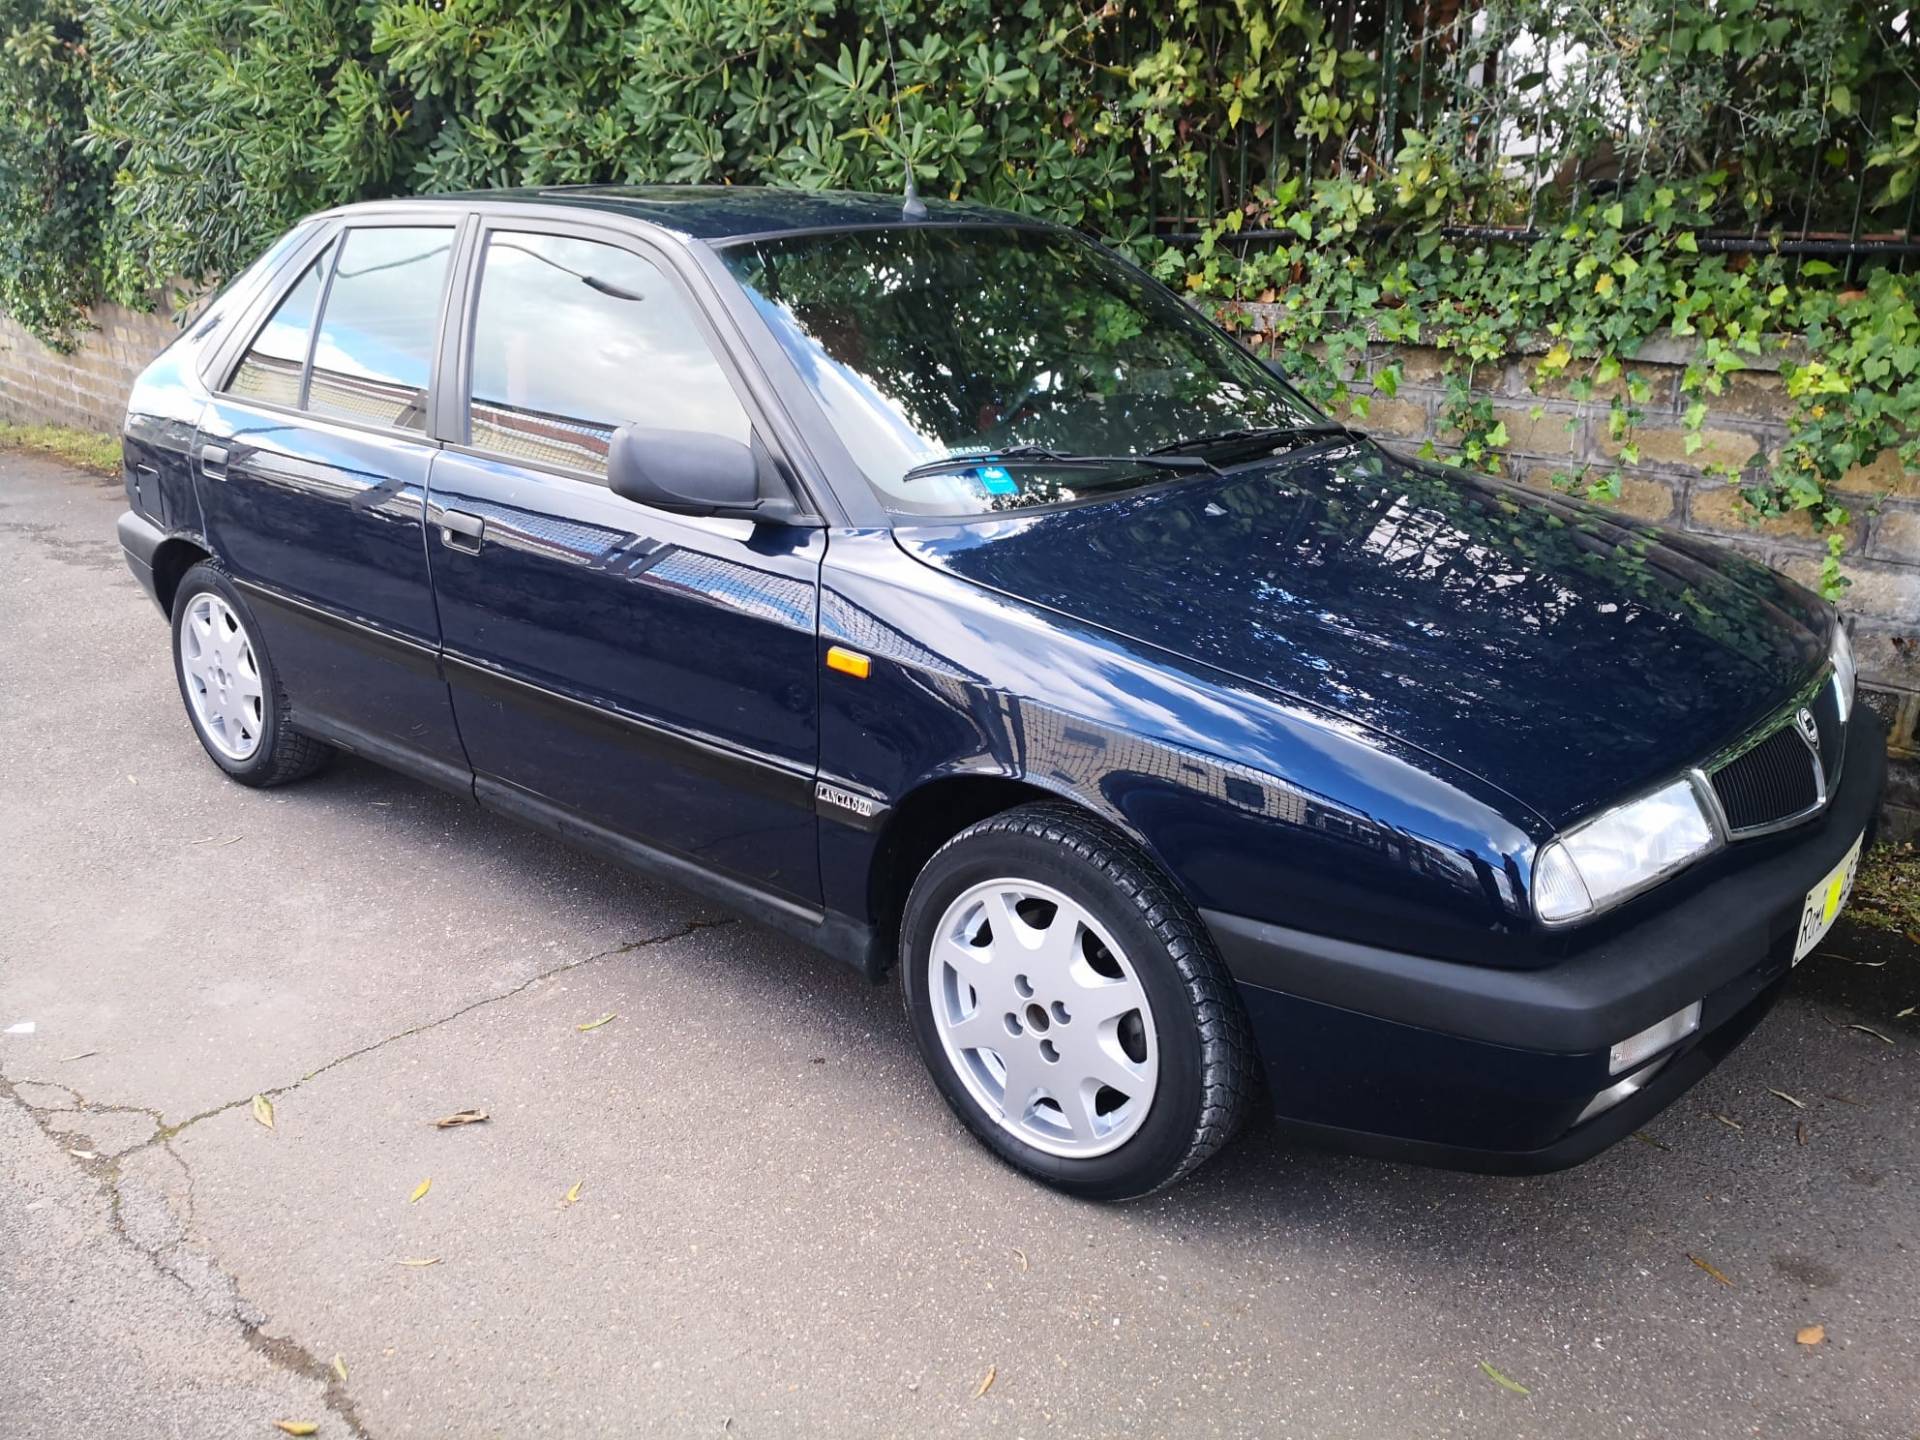 For Sale: Lancia Delta (1993) offered for £5,680